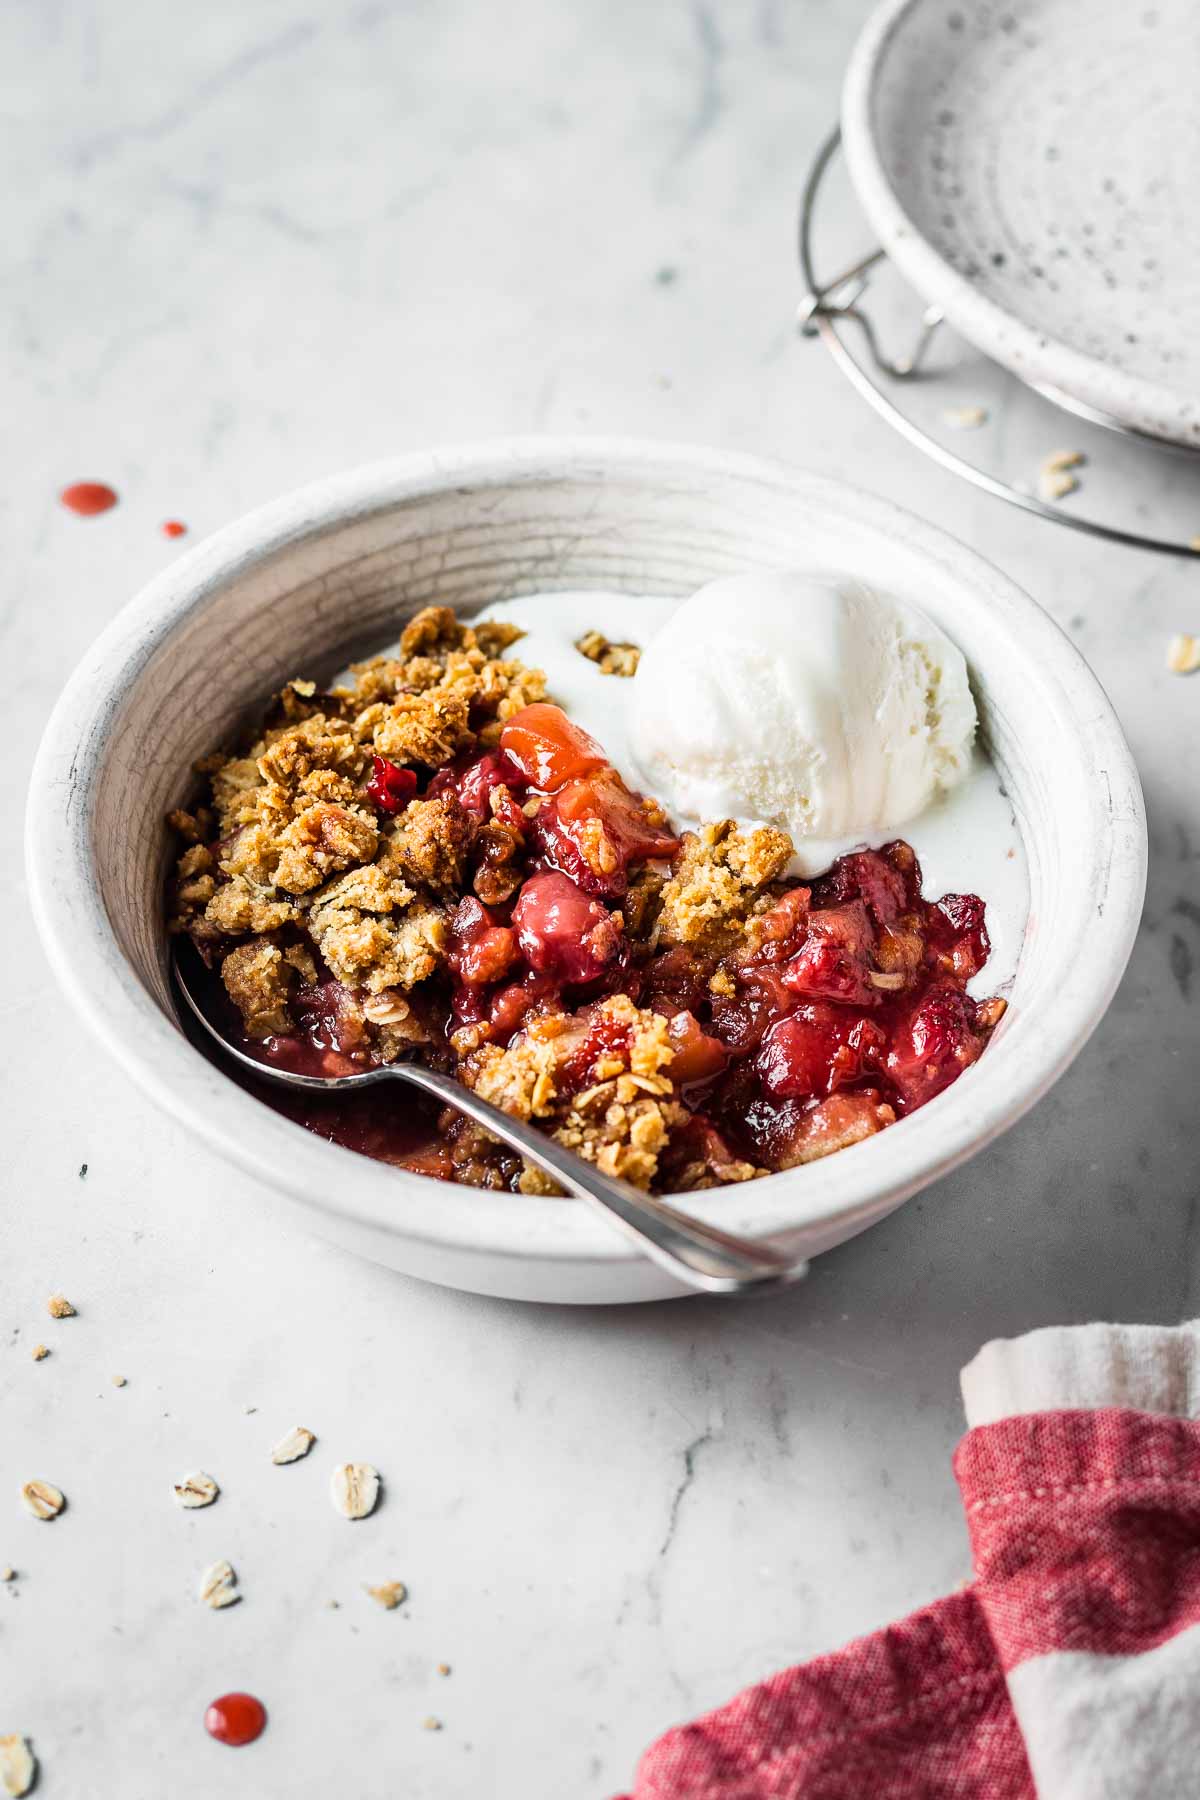 A white ceramic bowl filled with a serving of strawberry apple crisp. The crisp is topped with a scoop of vanilla ice cream, which is beginning to melt at the bottom.